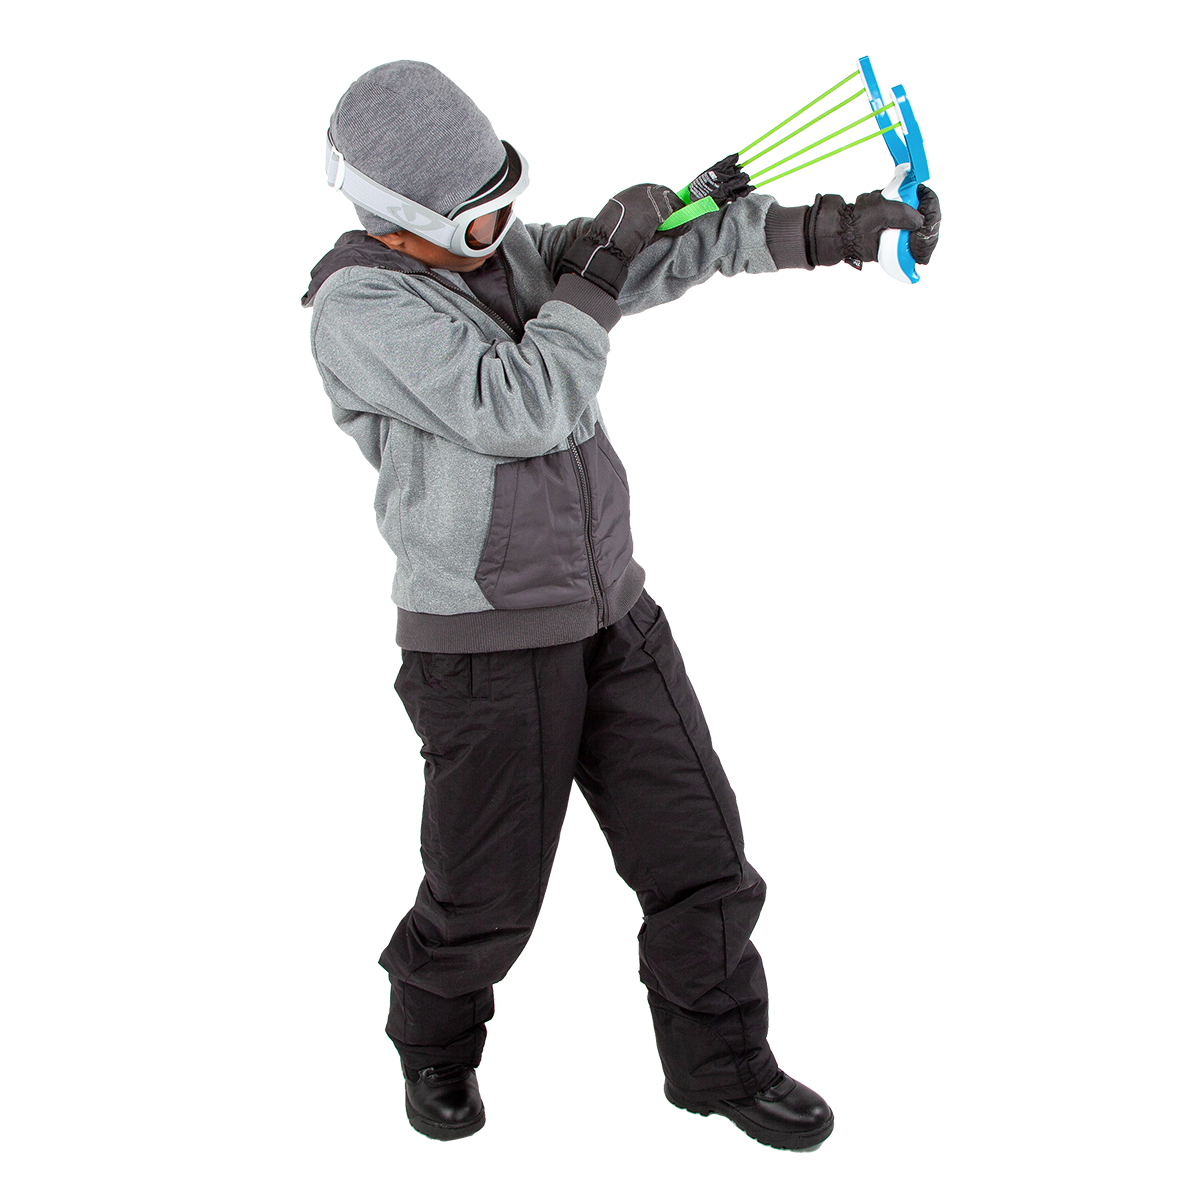 A boy is holding Wham-O Arctic Force Snow Strike side shoot